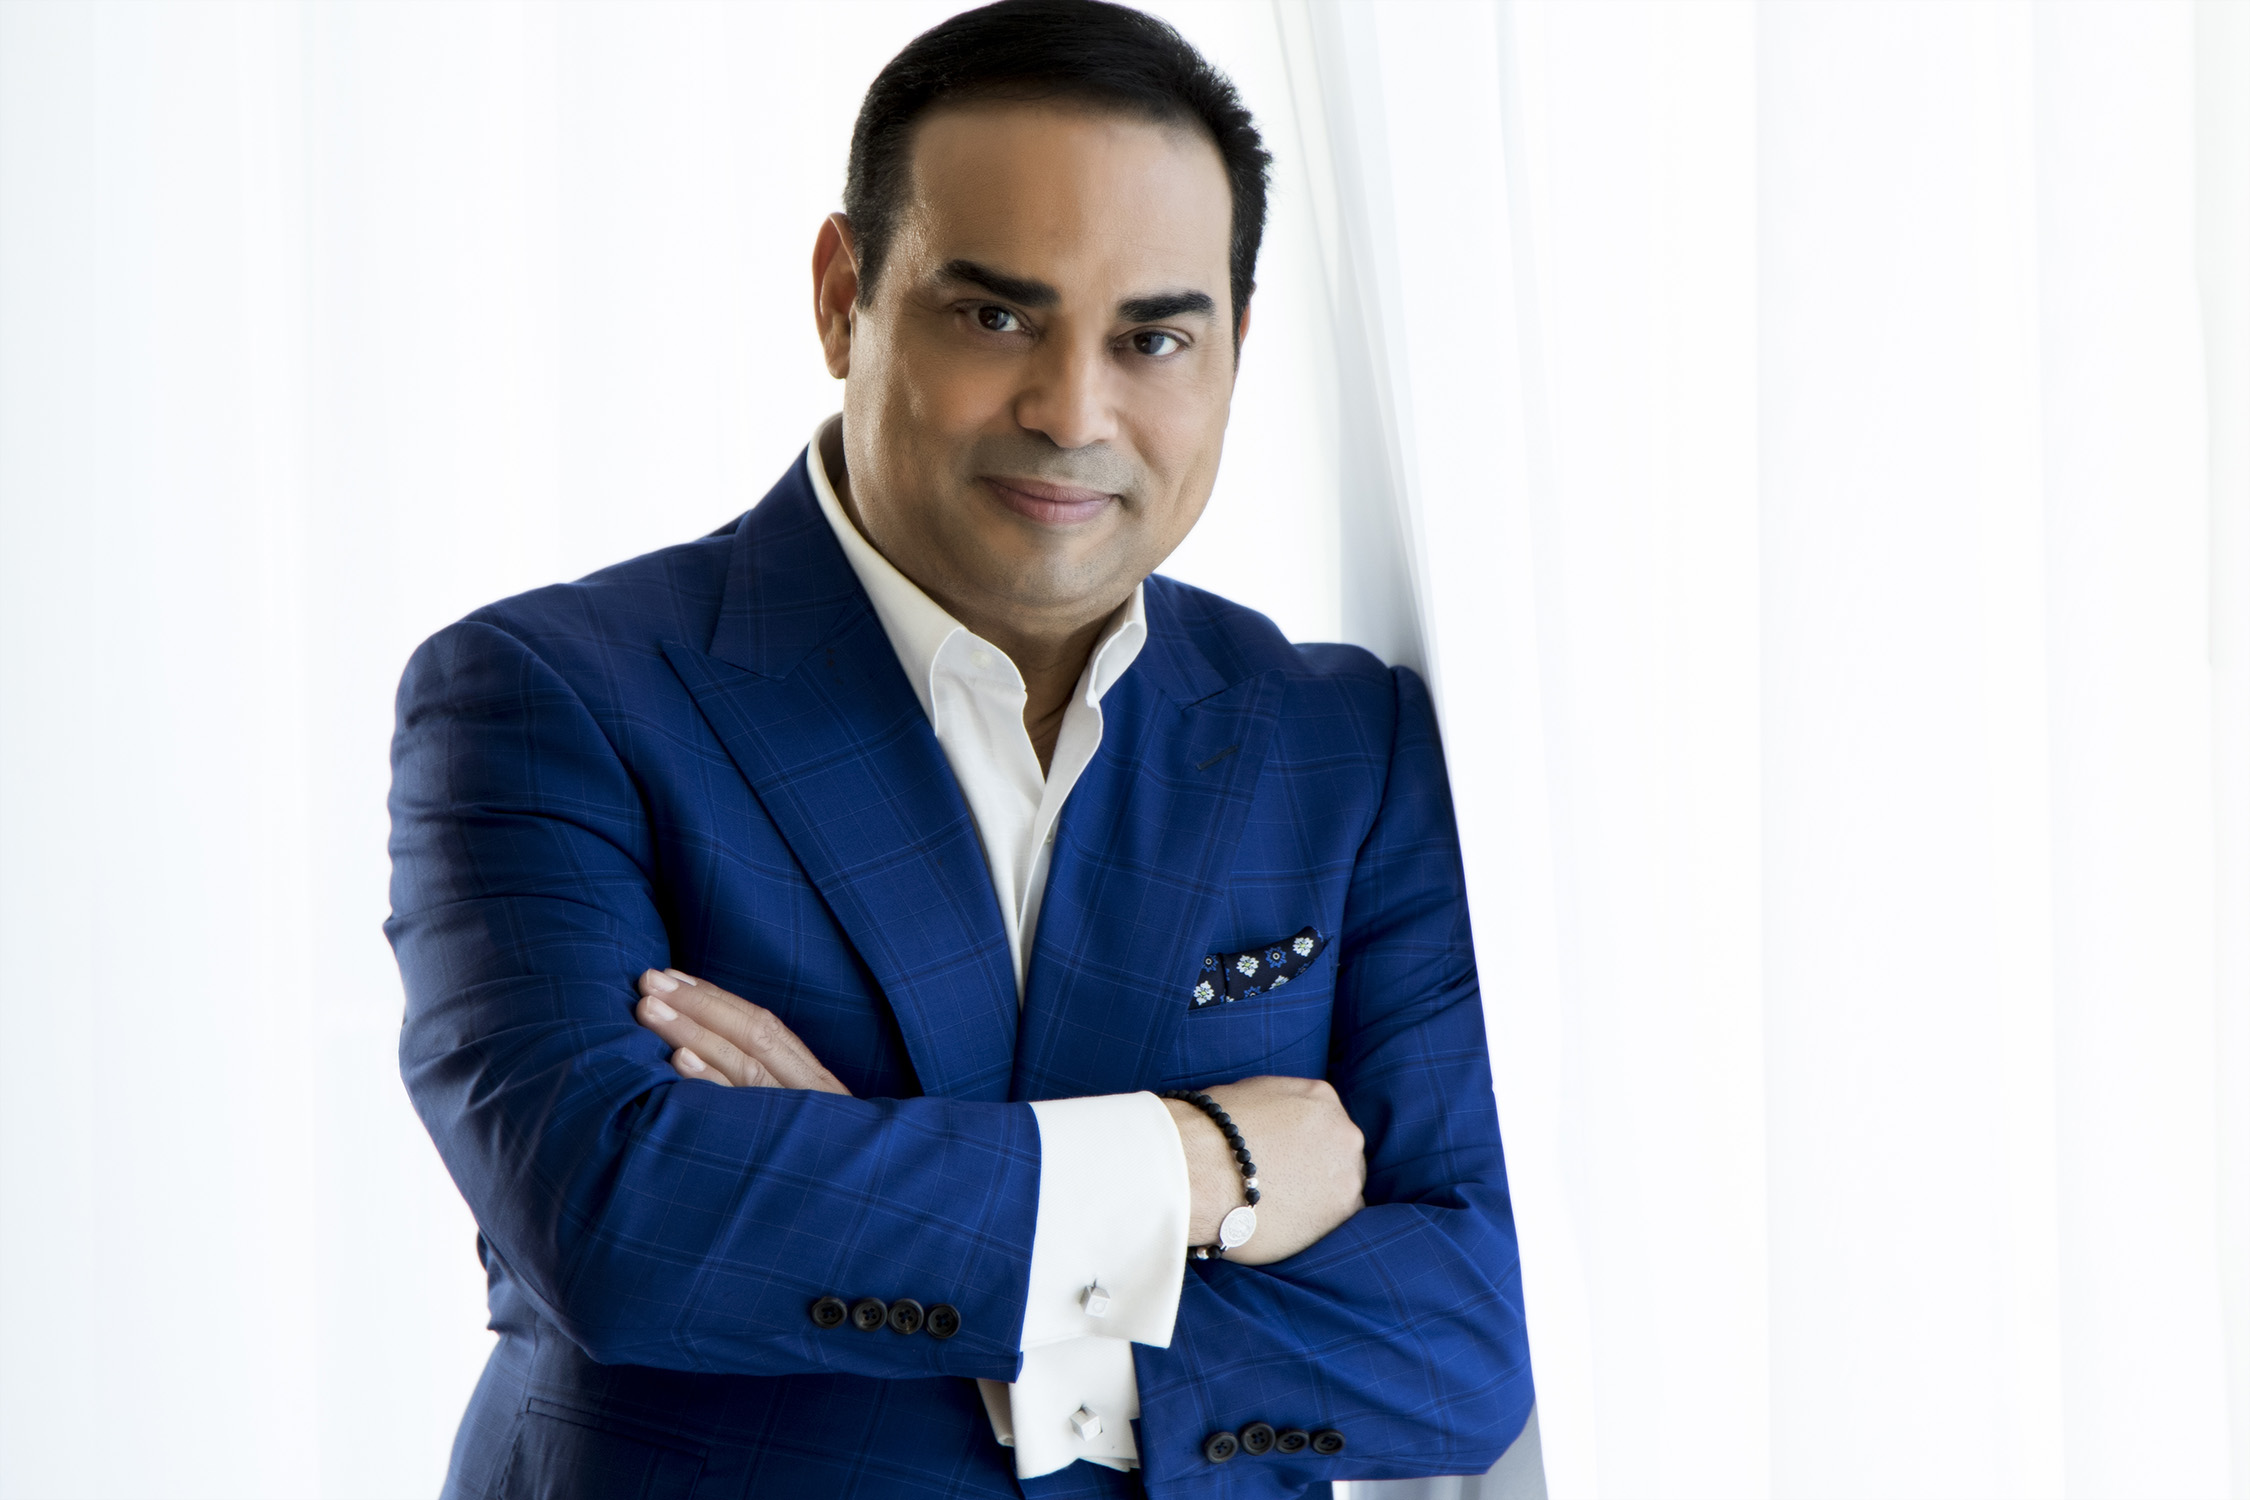 State Theatre New Jersey Presents Gilberto Santa Rosa “The Gentleman of